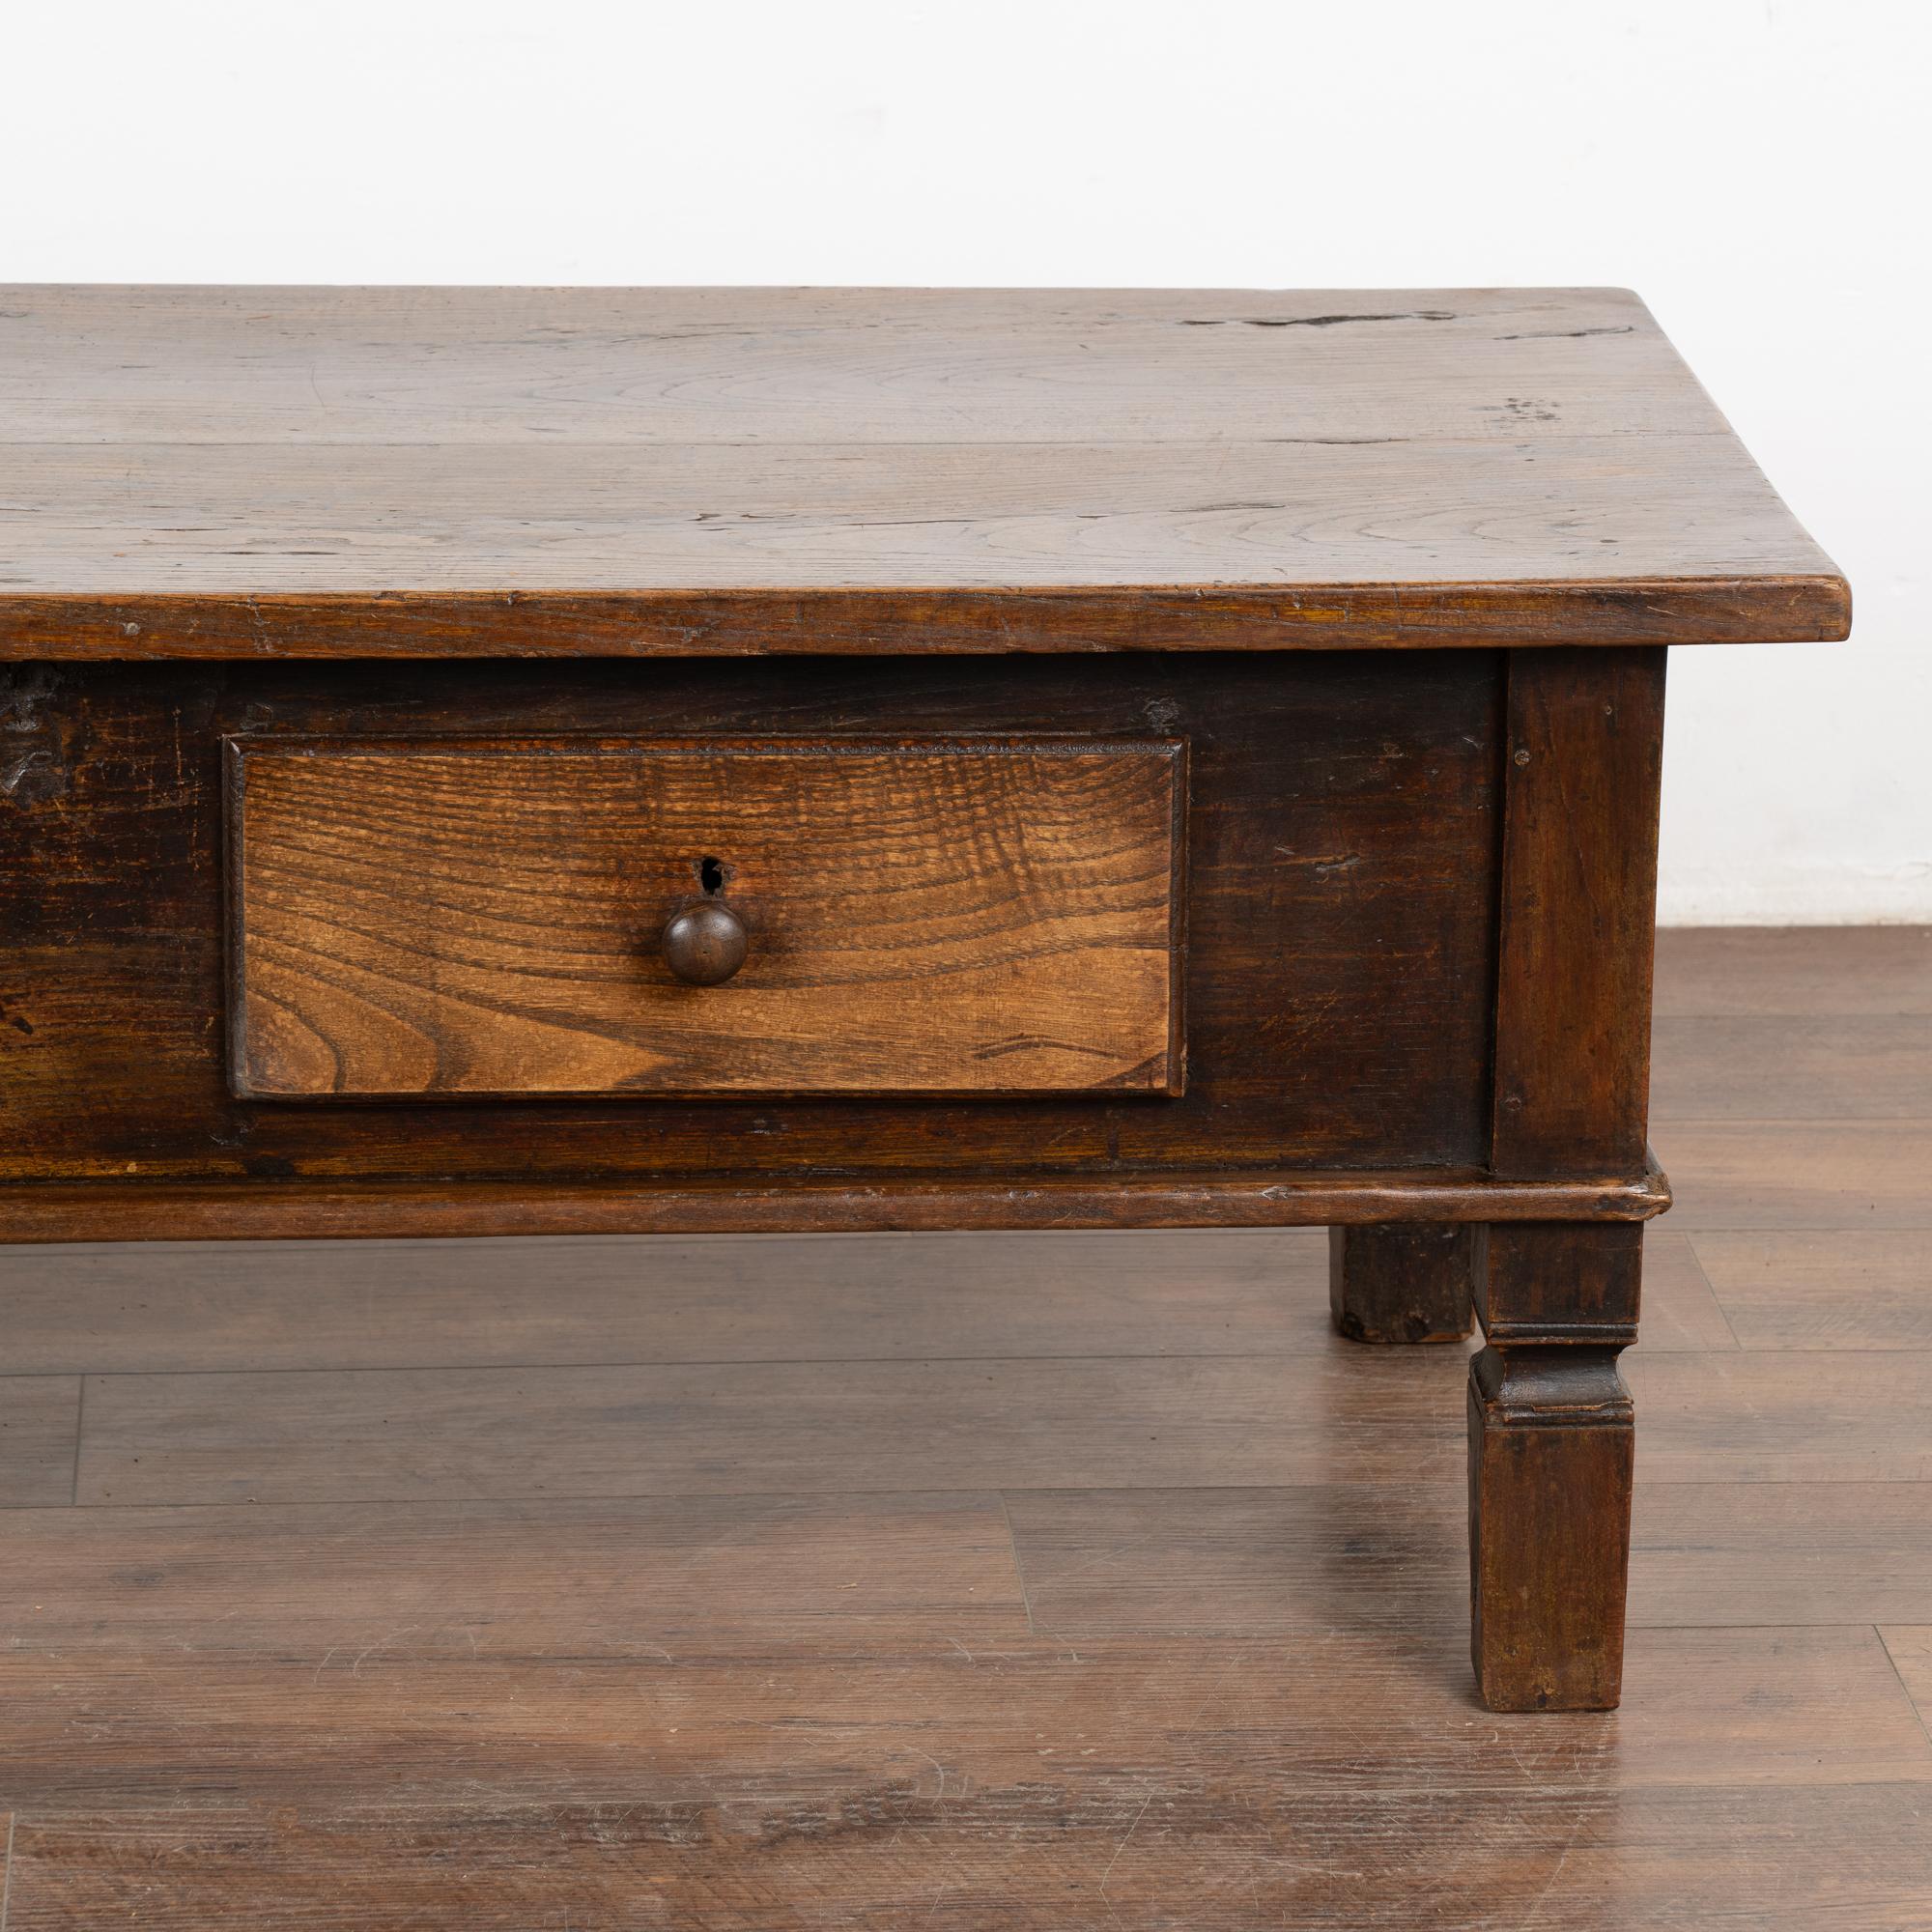 Two Drawer French Country Oak Coffee Table, circa 1820-40 For Sale 5